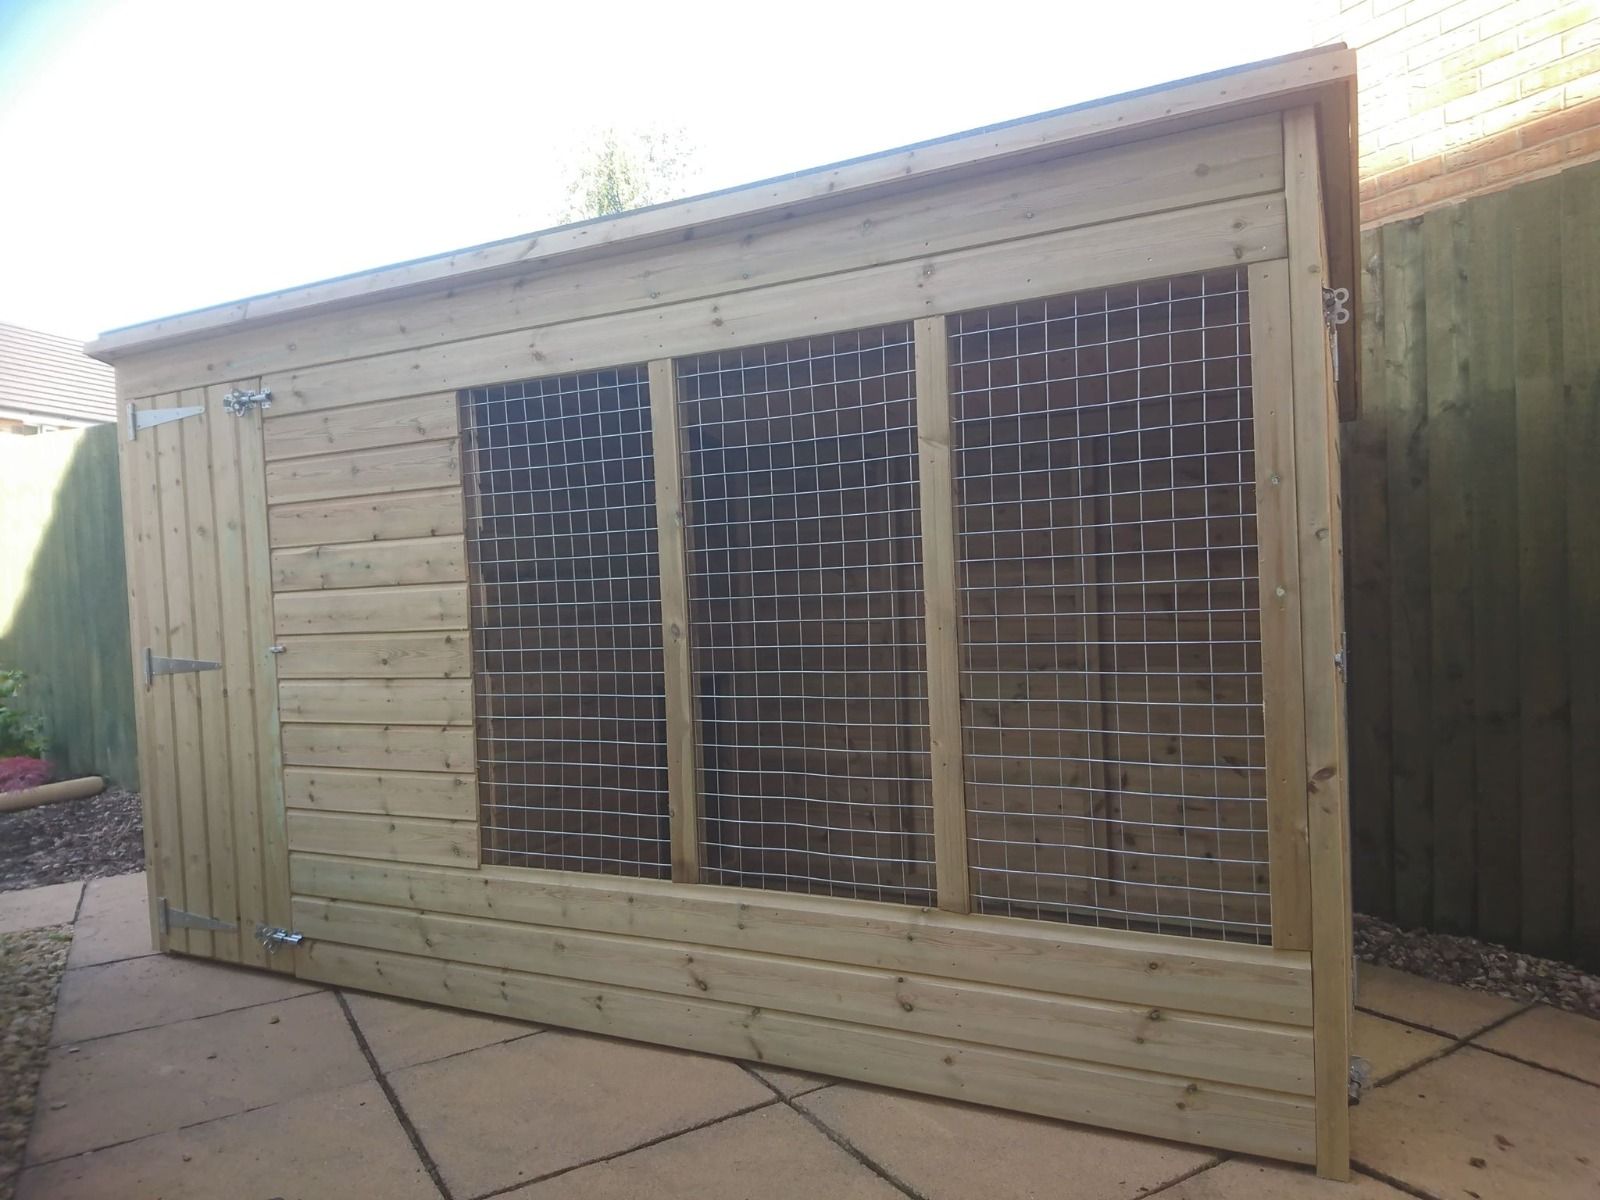 ASTON WOODEN DOG KENNEL AND RUN 14ft (wide) x 4ft (depth) x 5'7ft (high)